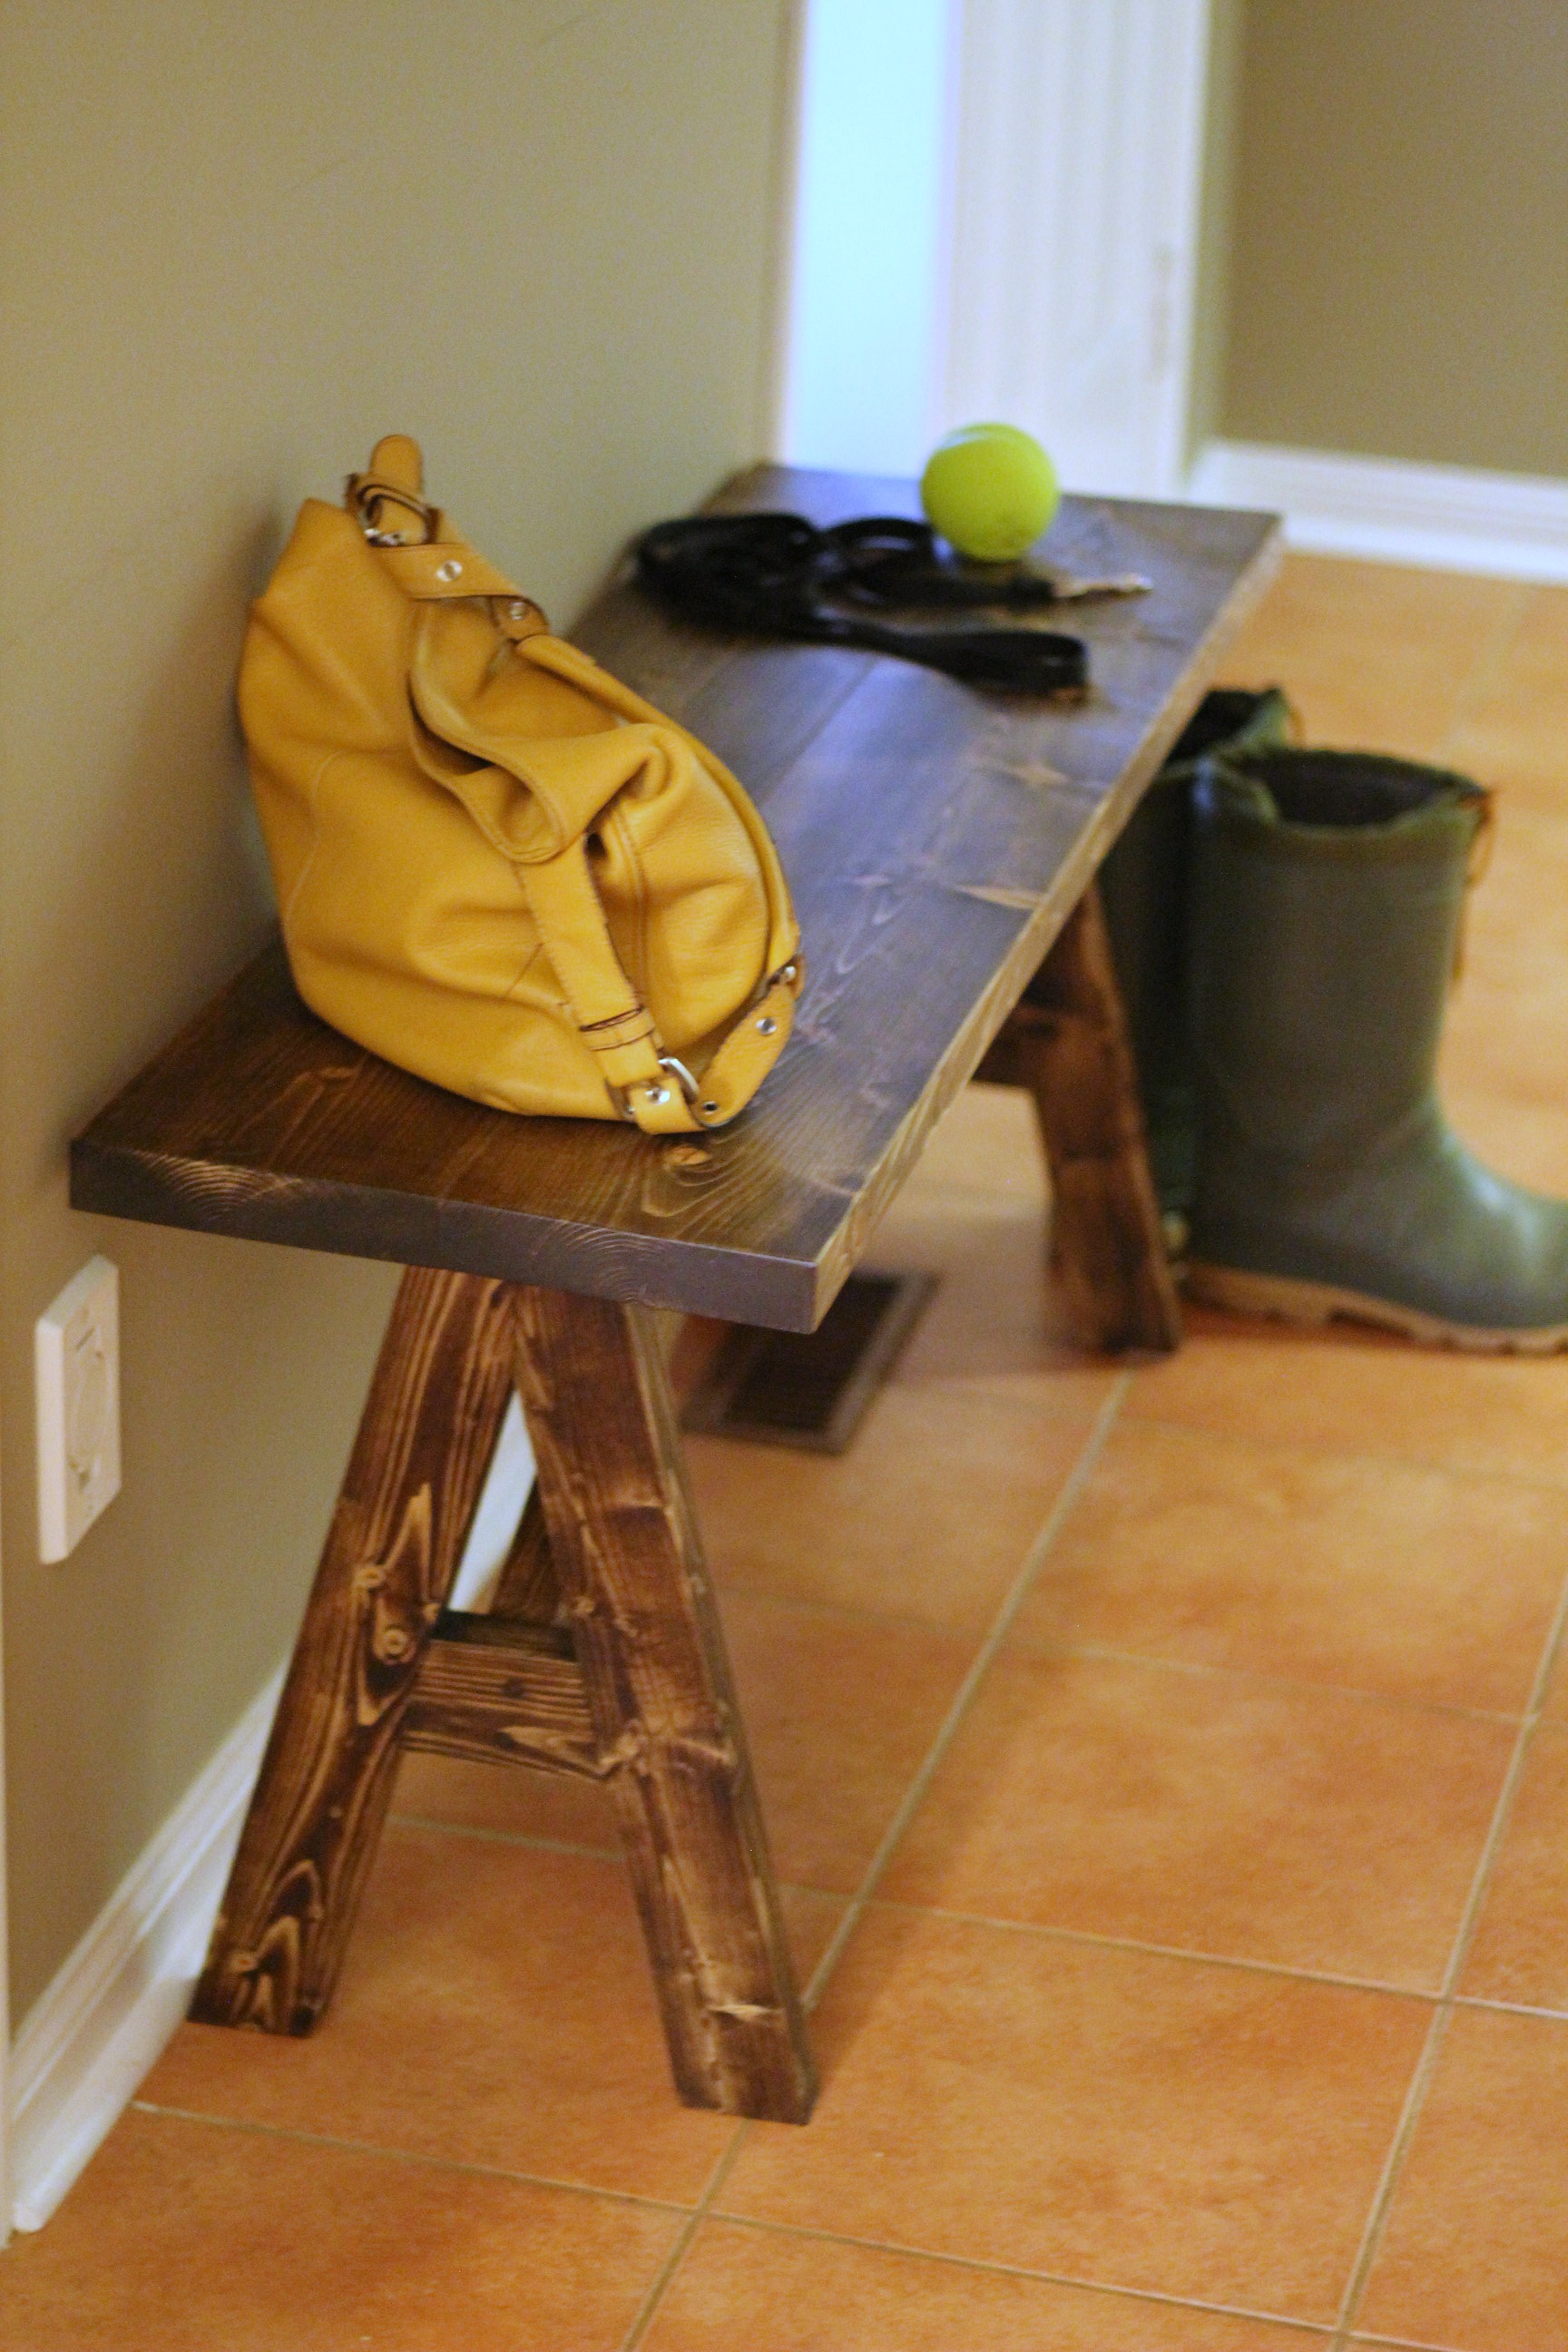 Build your own entryway bench